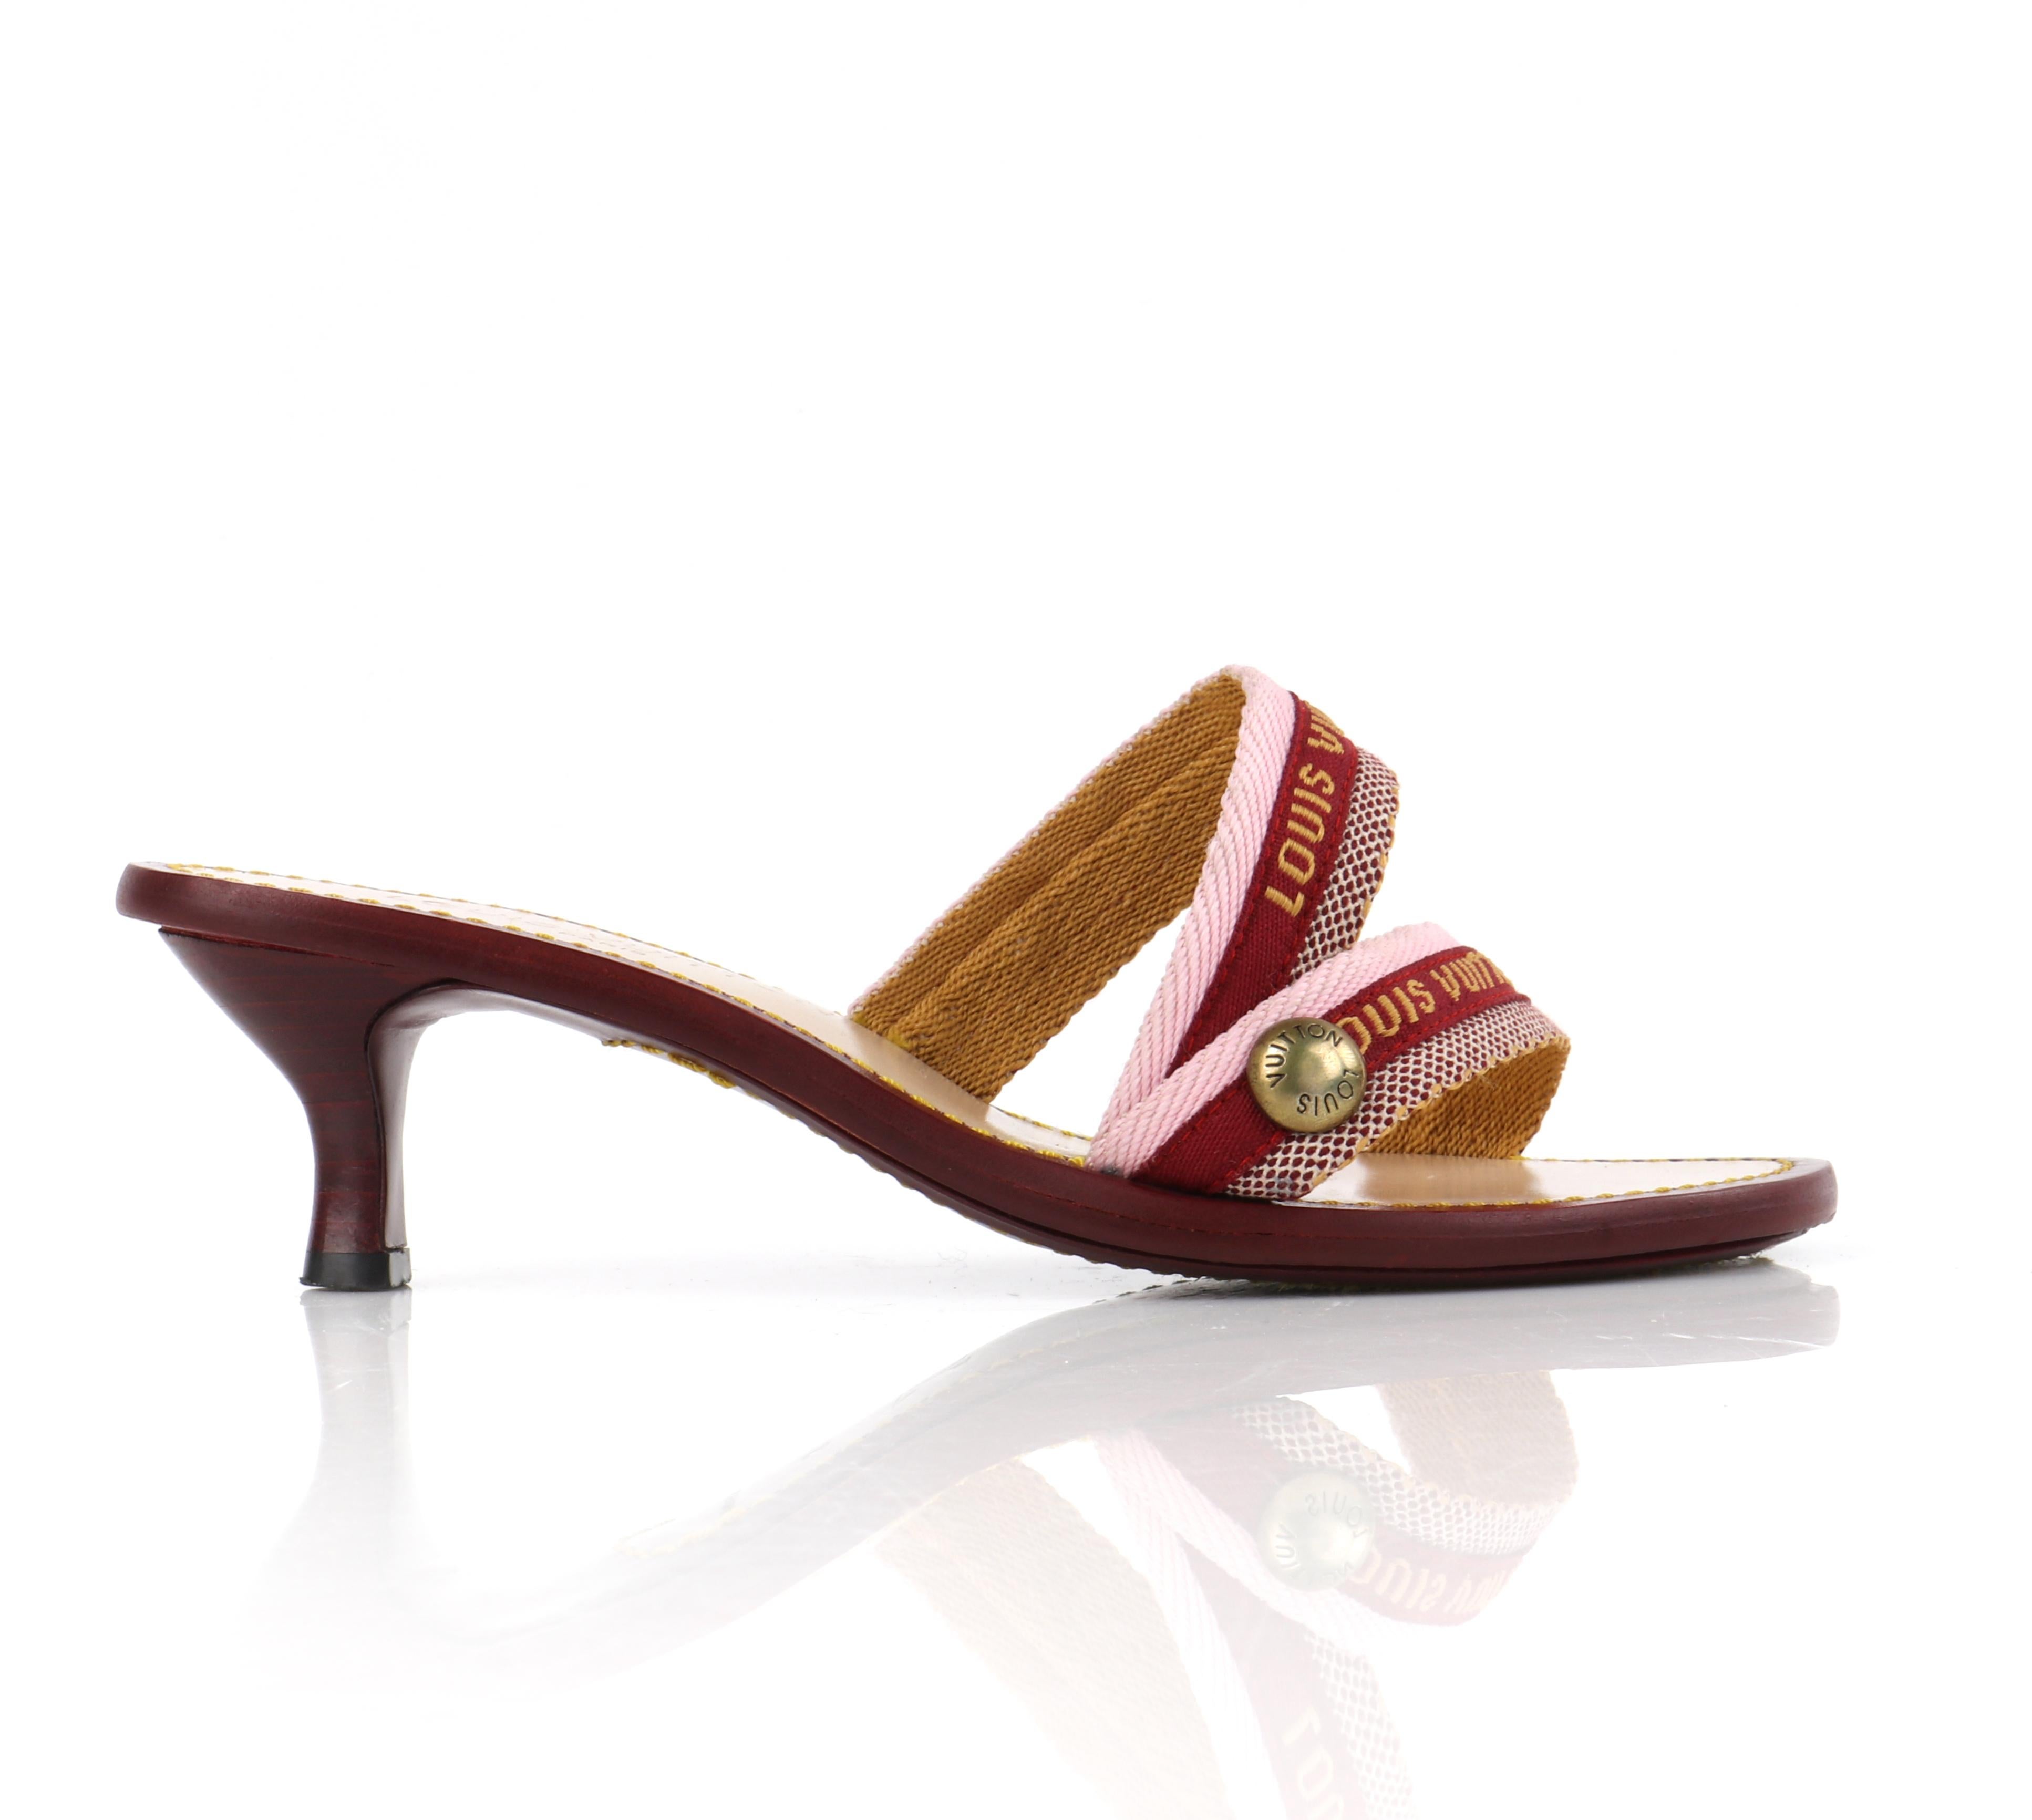 LOUIS VUITTON Burgundy Pink Logo Embroidered Strappy Slide Sandal Kitten Heels
  
Brand / Manufacturer: Louis Vuitton
Designer: Marc Jacobs
Style: Sandals
Marked Size: 37
Color(s): Shades of red (exterior, soles); pink, white, golden yellow